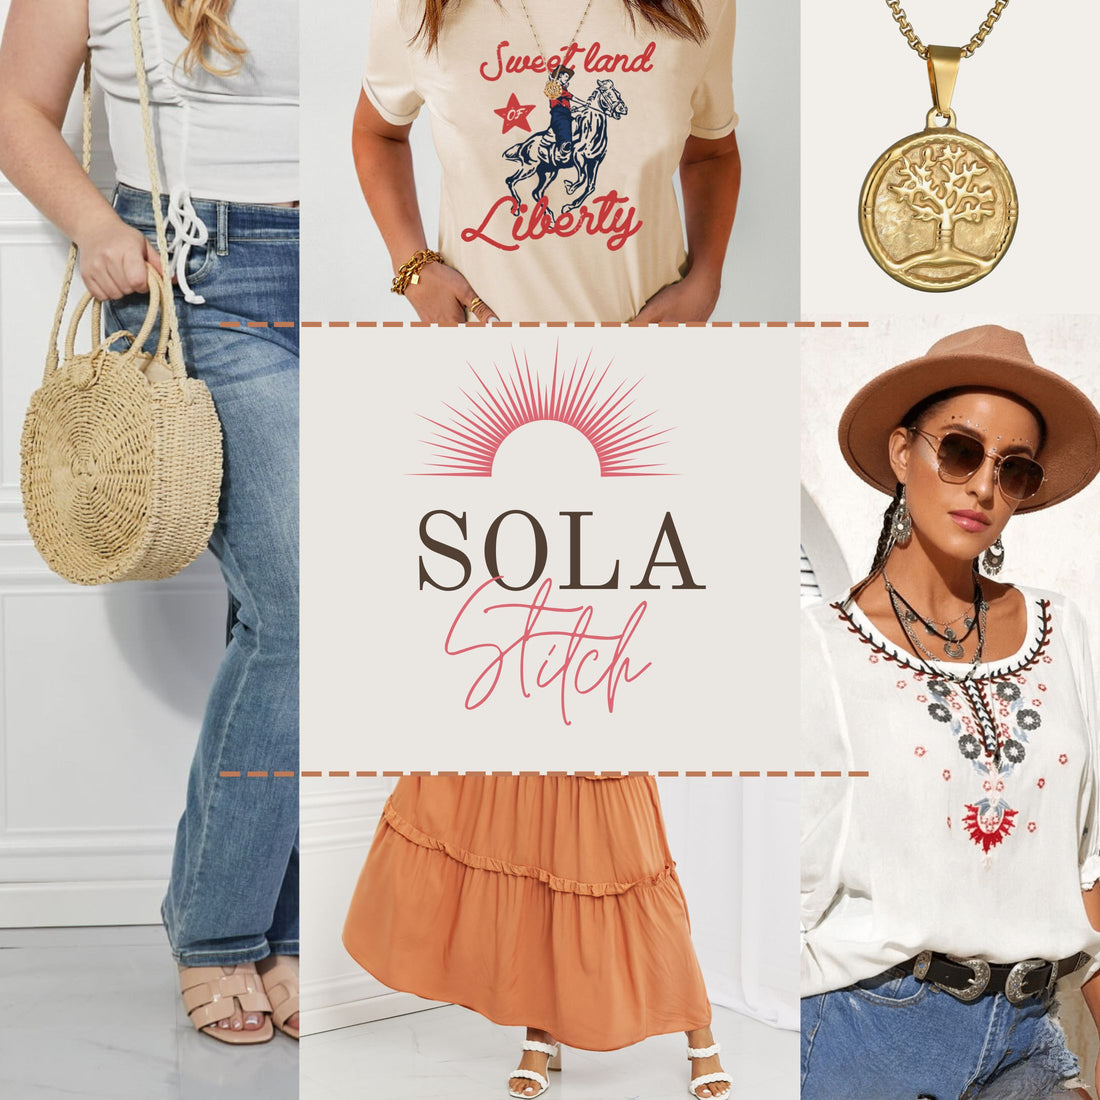 Sola Stitch logo collage with Bo ho looks, graphic tees, tunic tops and gold jewelry